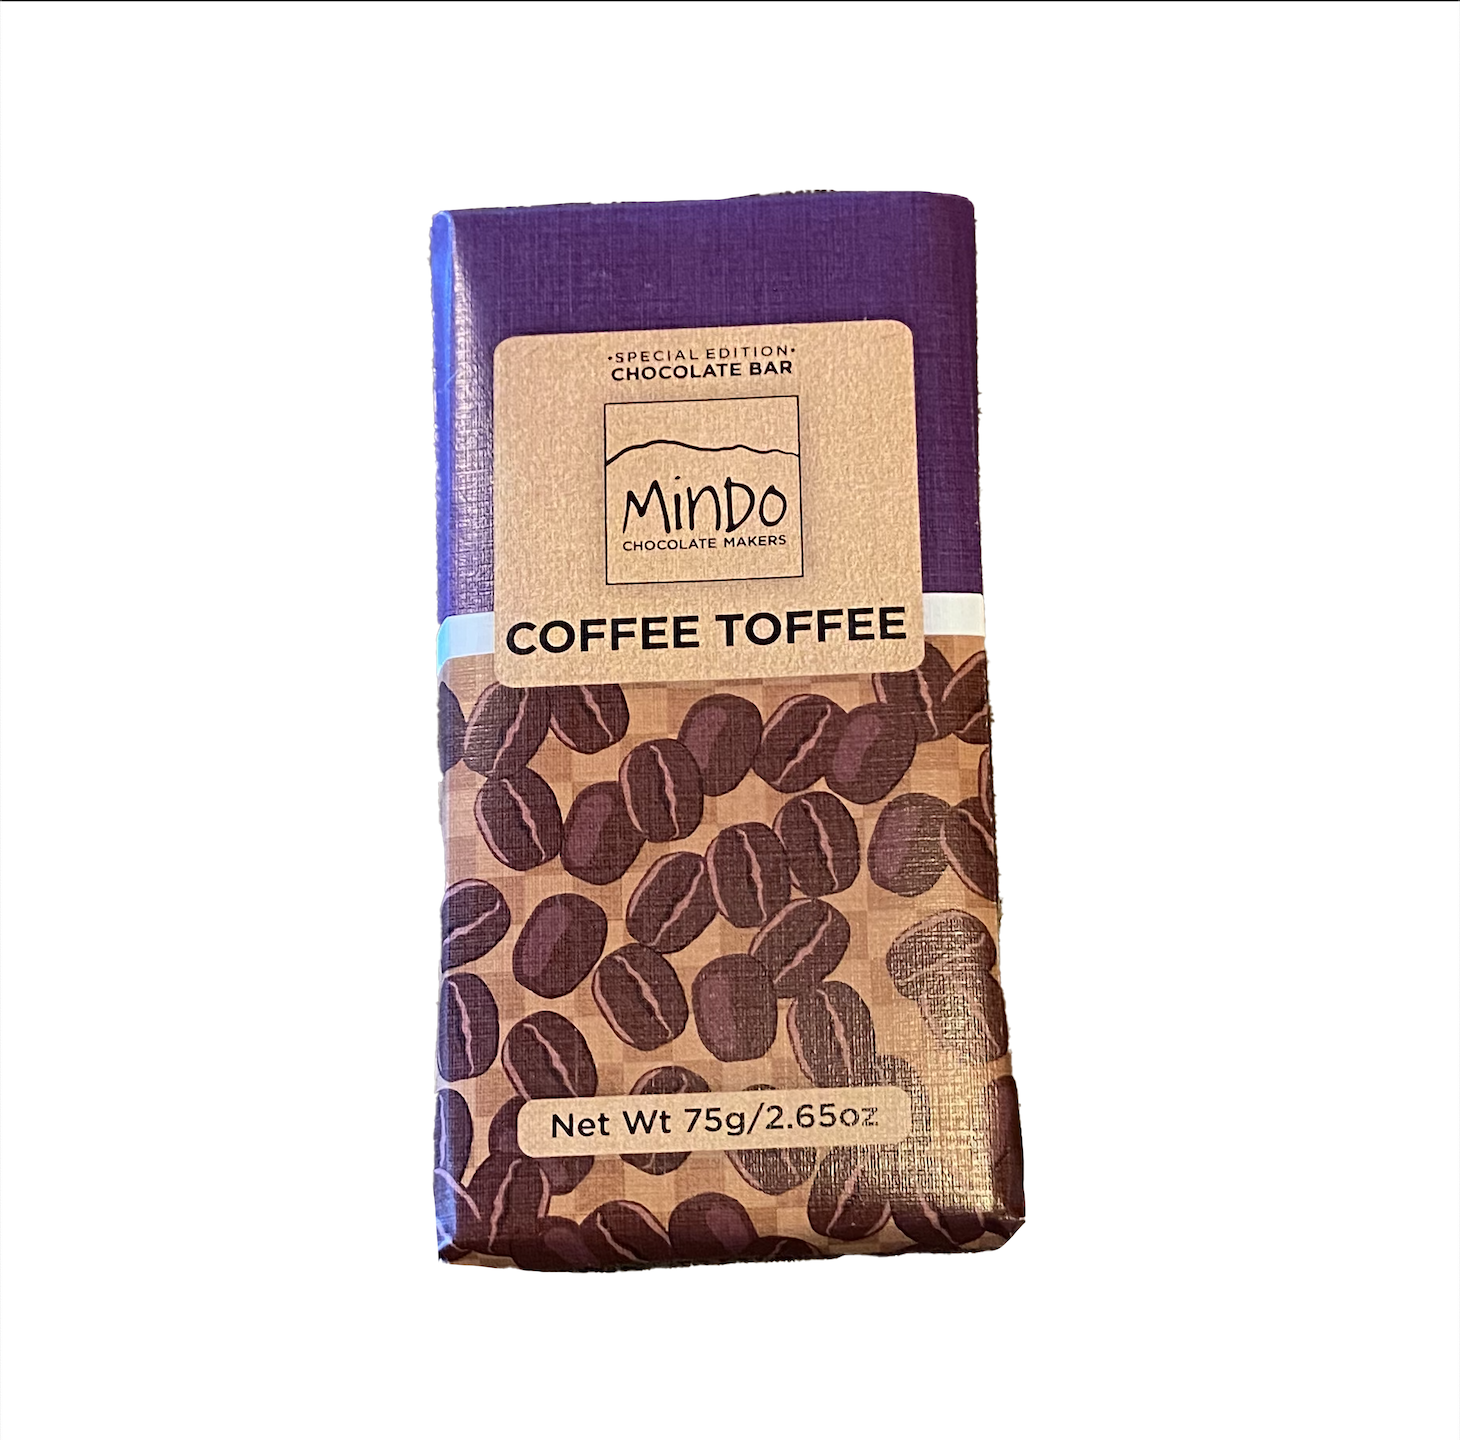 Picture Mindo Coffee Toffee Chocolate Bar 75g